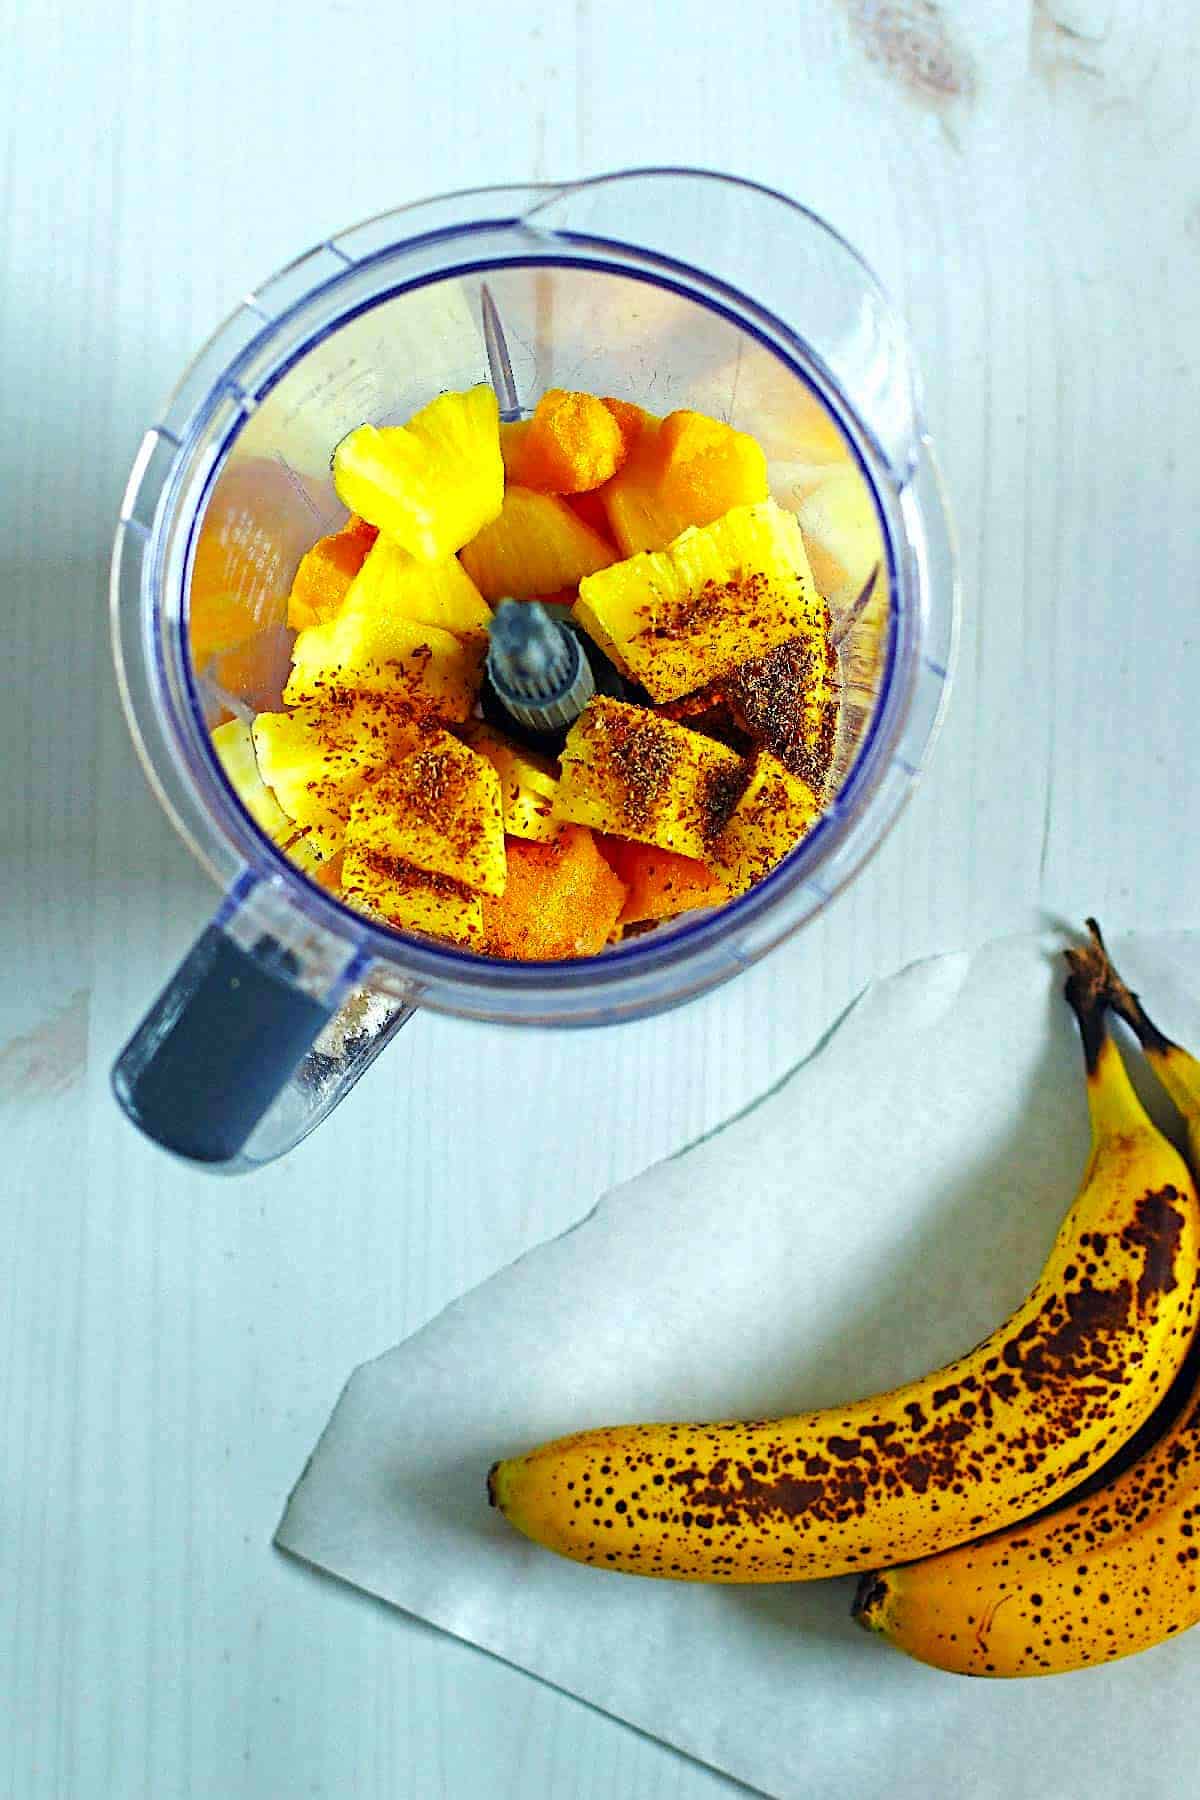 Smoothie ingredients in a blender and bananas next to the blender